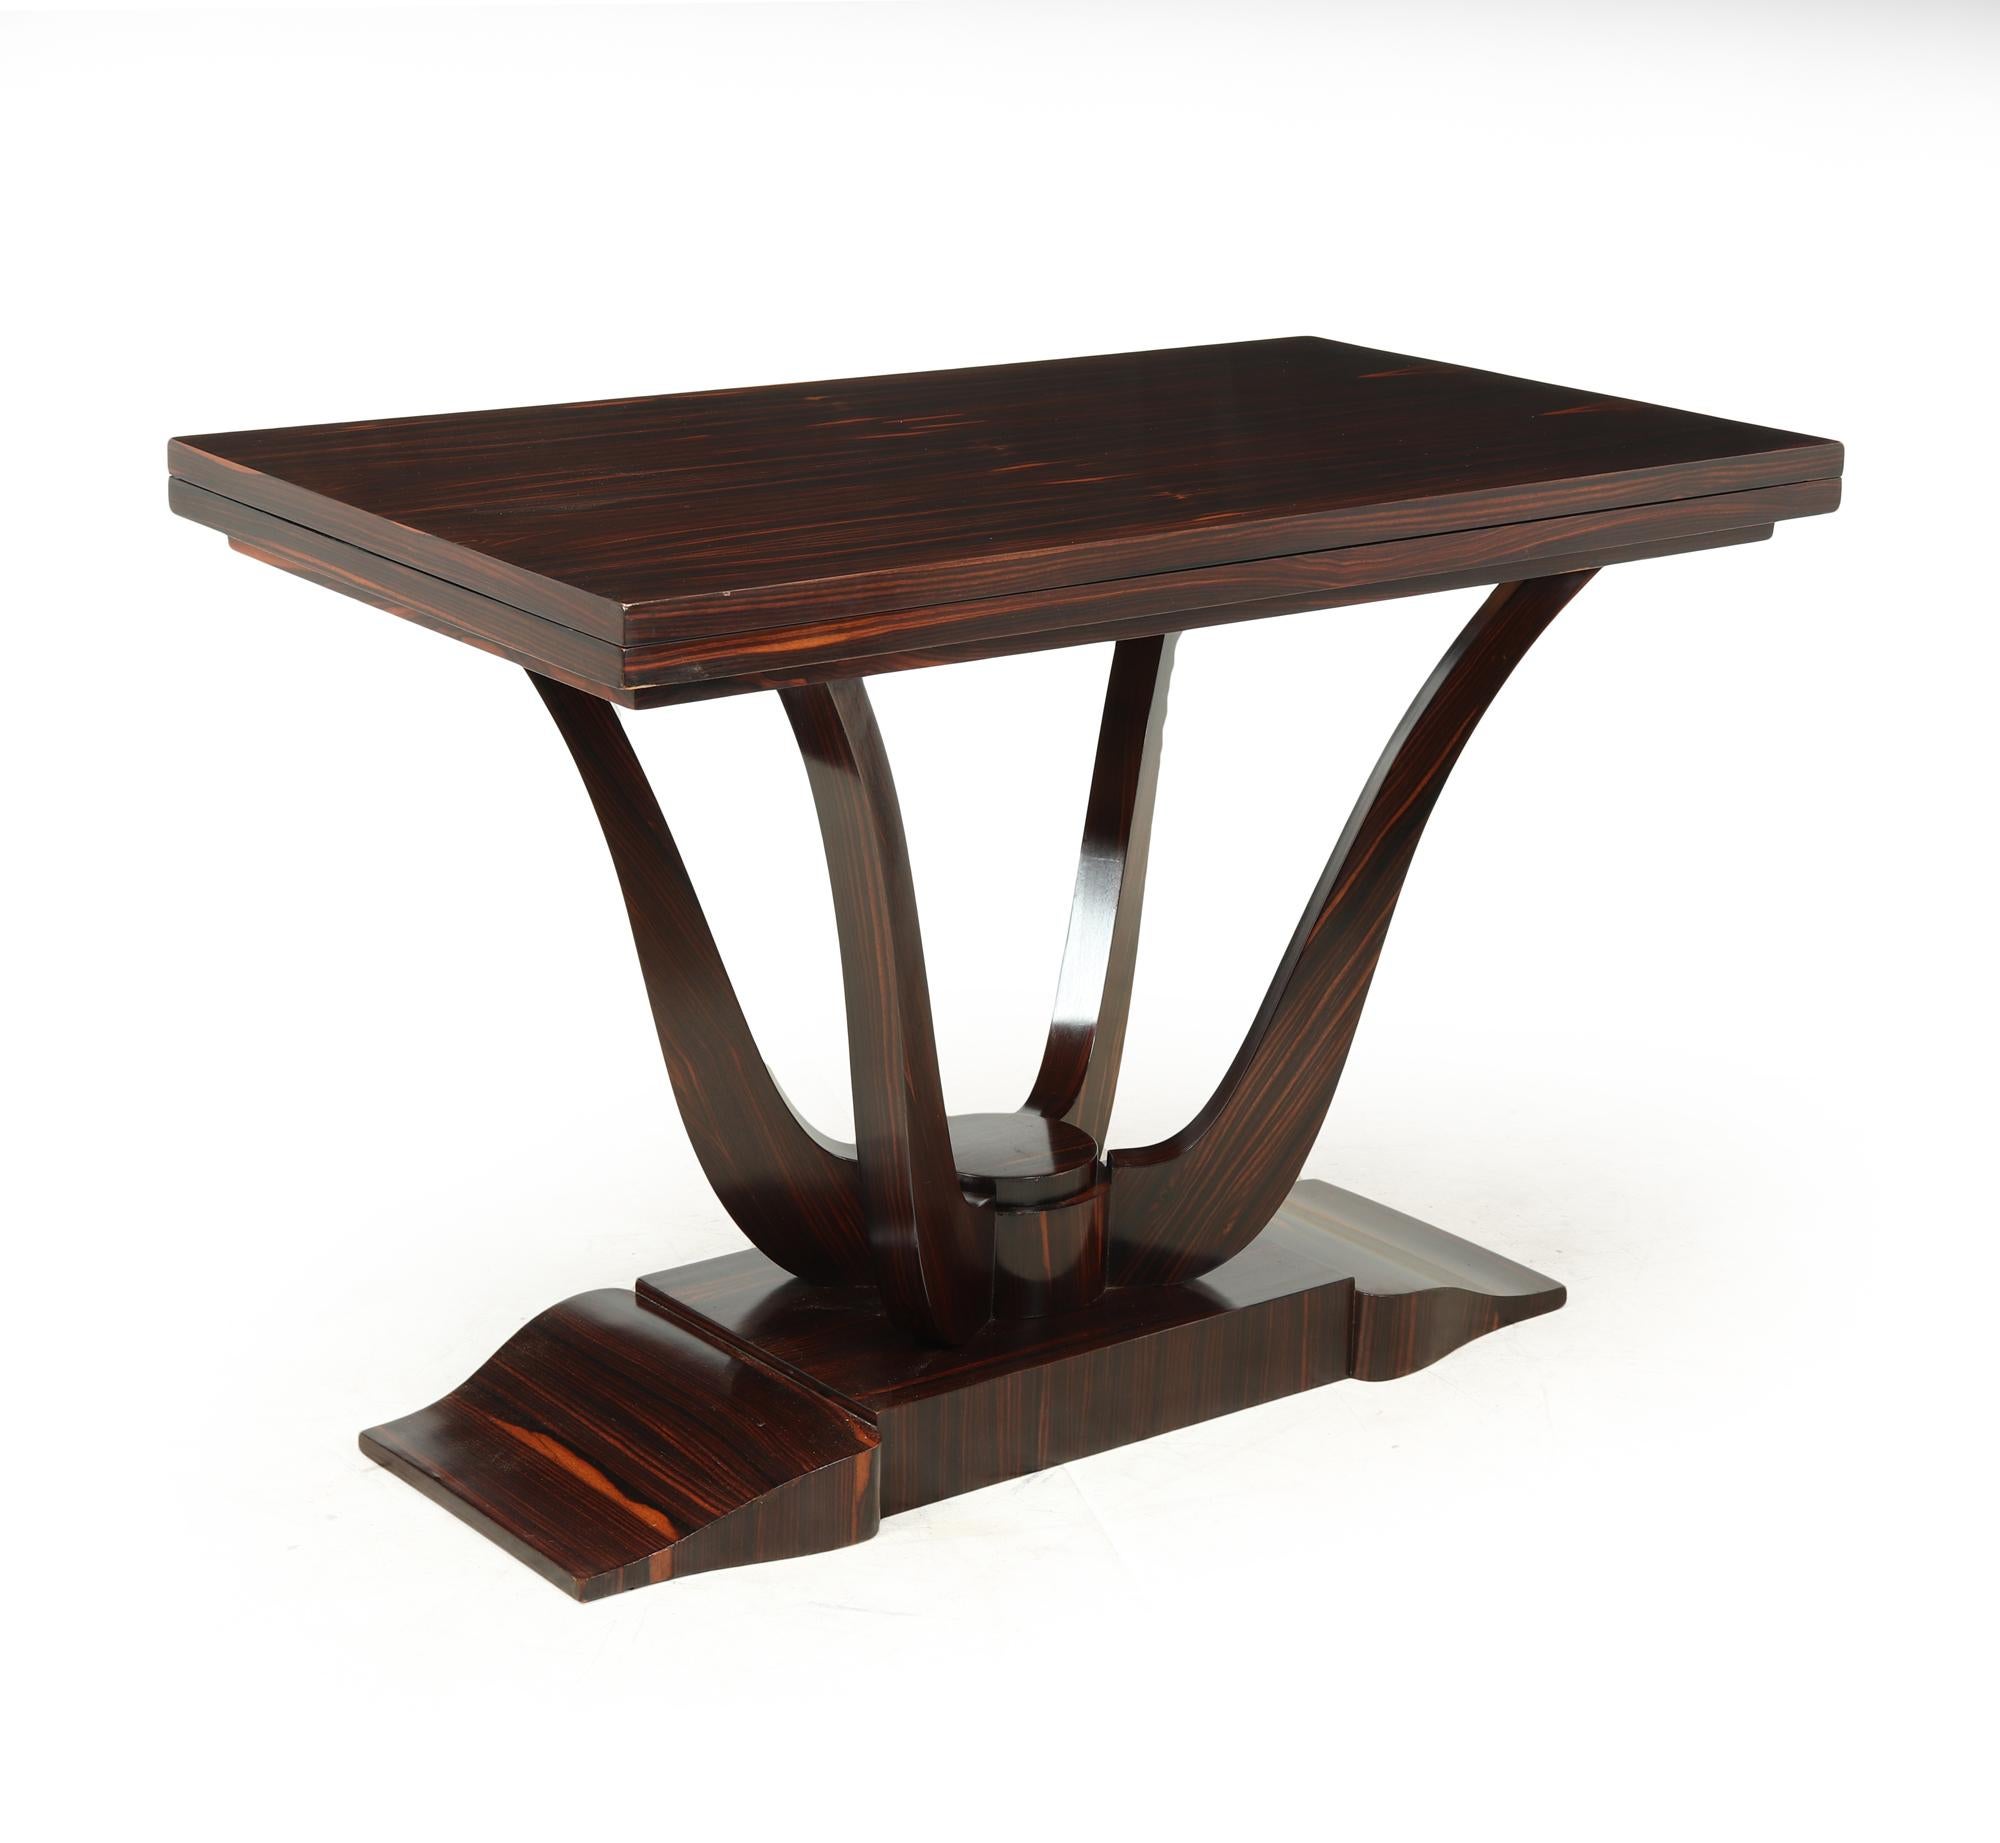 A fine quality and very elegant console table in macassar ebony with turn and flip over top, the table has been fully polished by hand and is in excellent condition throughout

Age: 1925

Style: Art Deco

Material: Macassar Ebony

Origin :